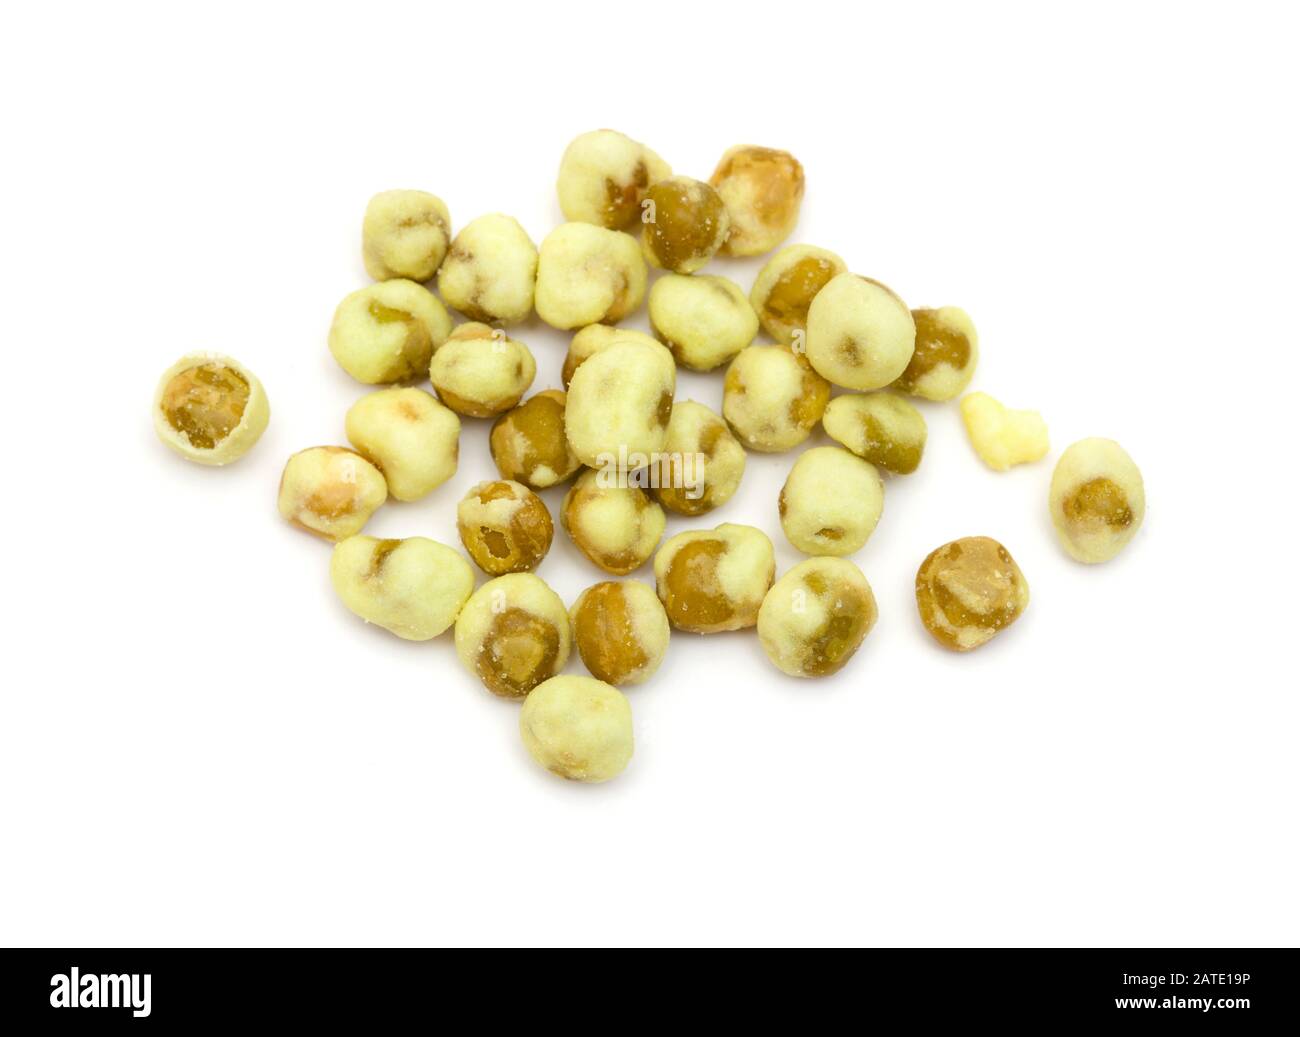 snack food wasabi peas isolated on white background Stock Photo